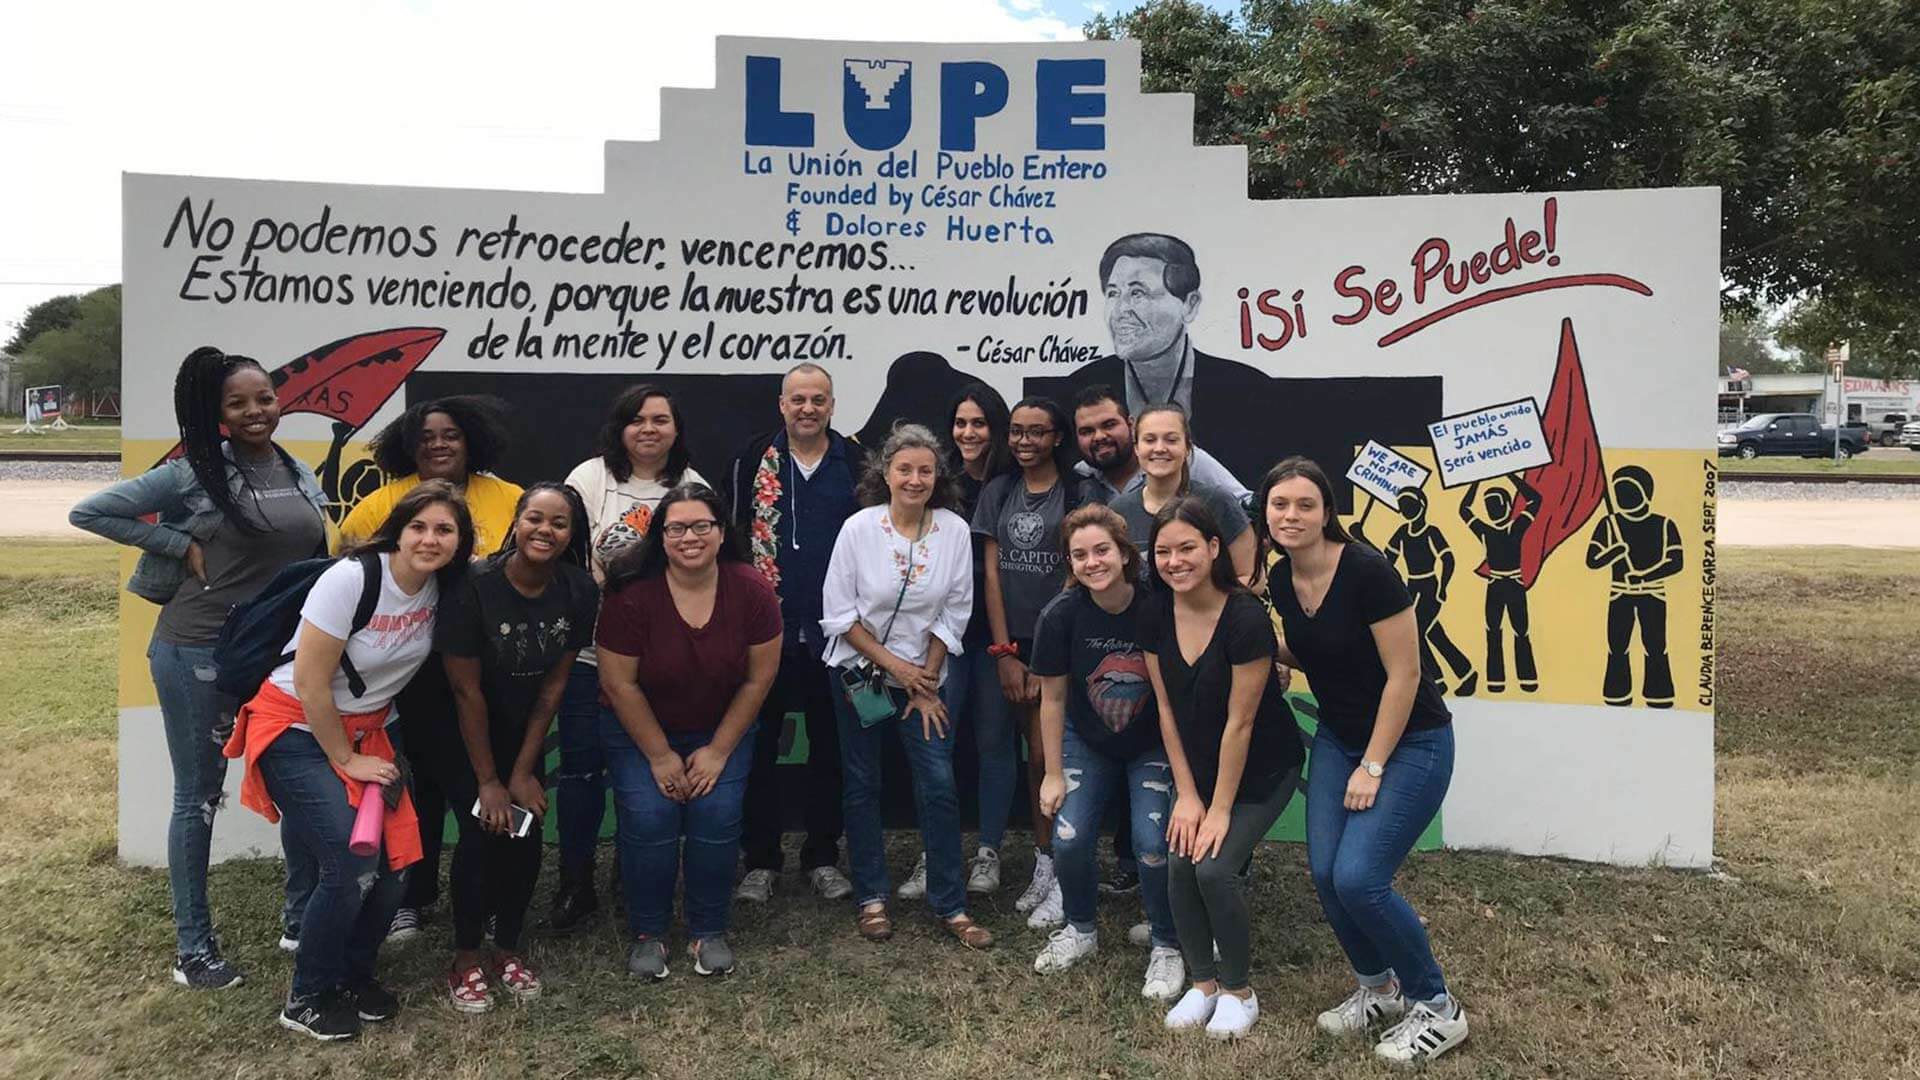 Students stand in front of LUPE, a community activist organization in the Rio Grande Valley founded by Cesar Chavez and Dolores Huerta